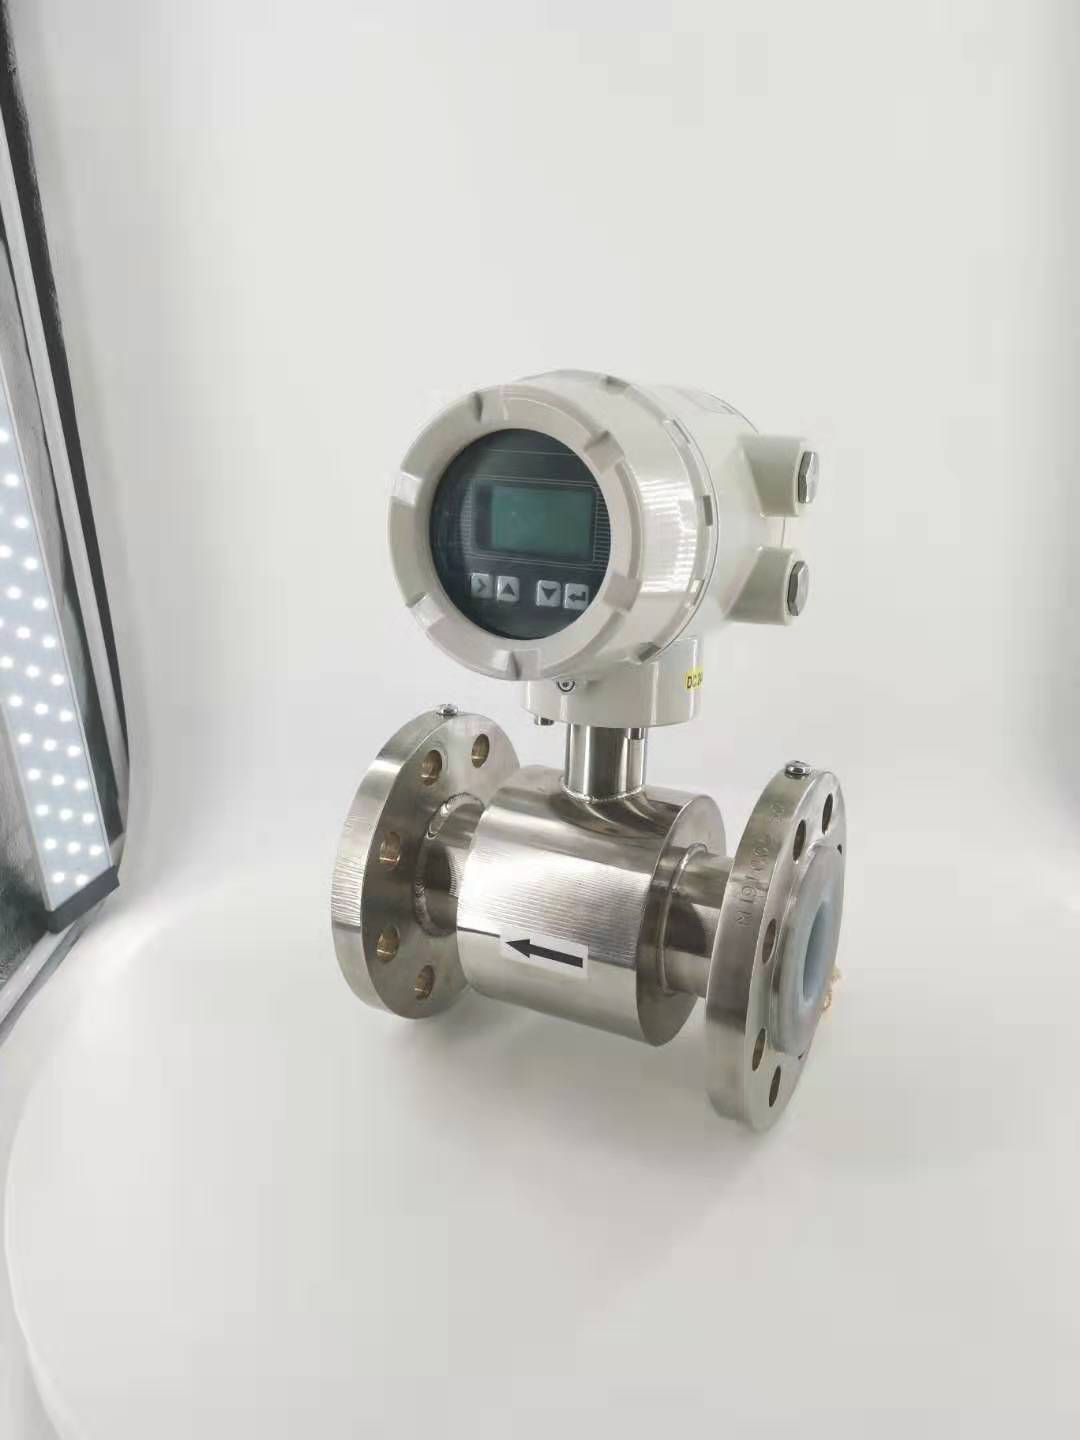 Frontline staff teach you how to judge the accuracy of electromagnetic flowmeters